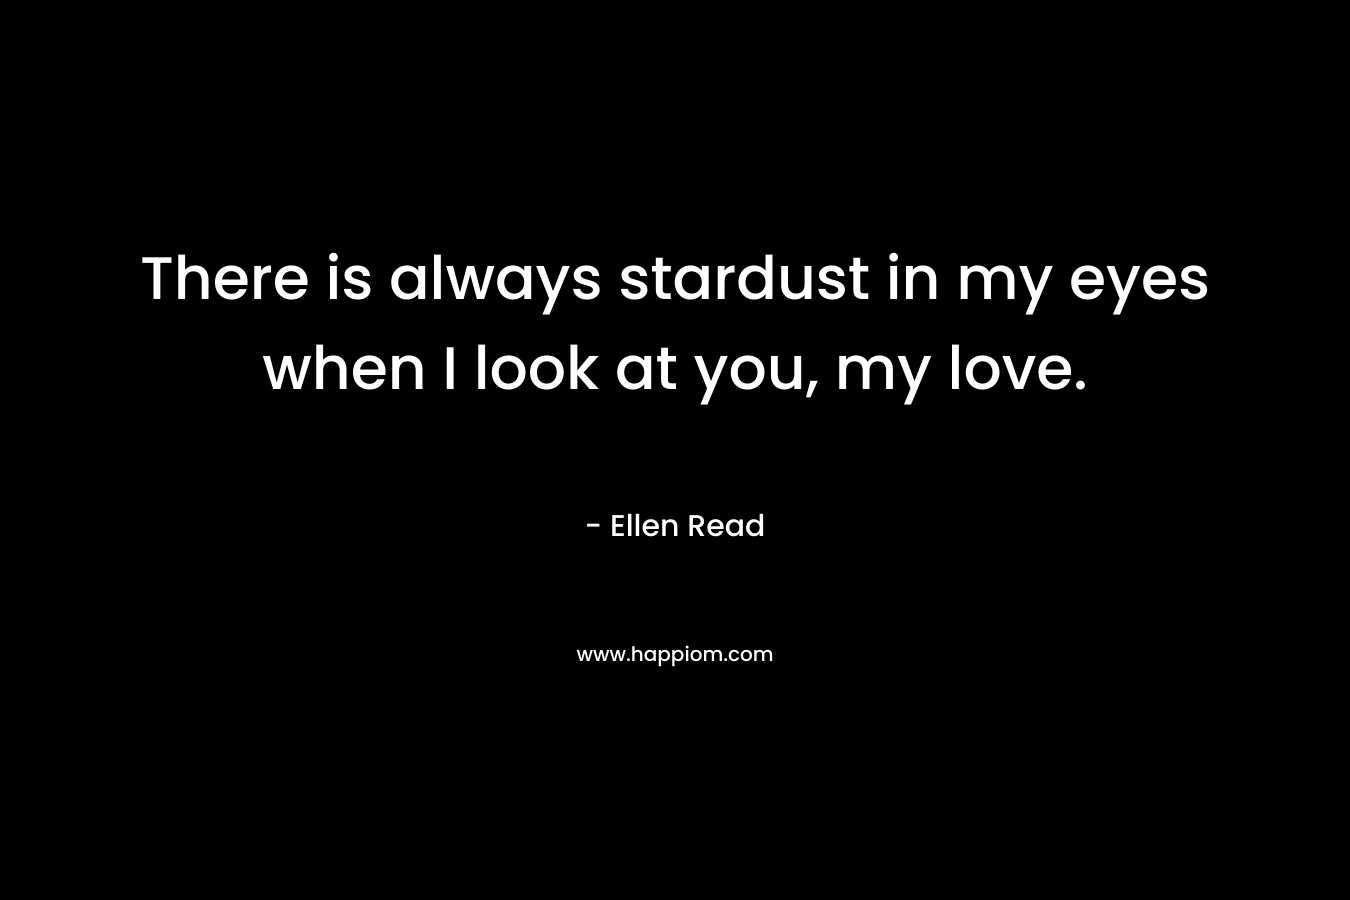 There is always stardust in my eyes when I look at you, my love.